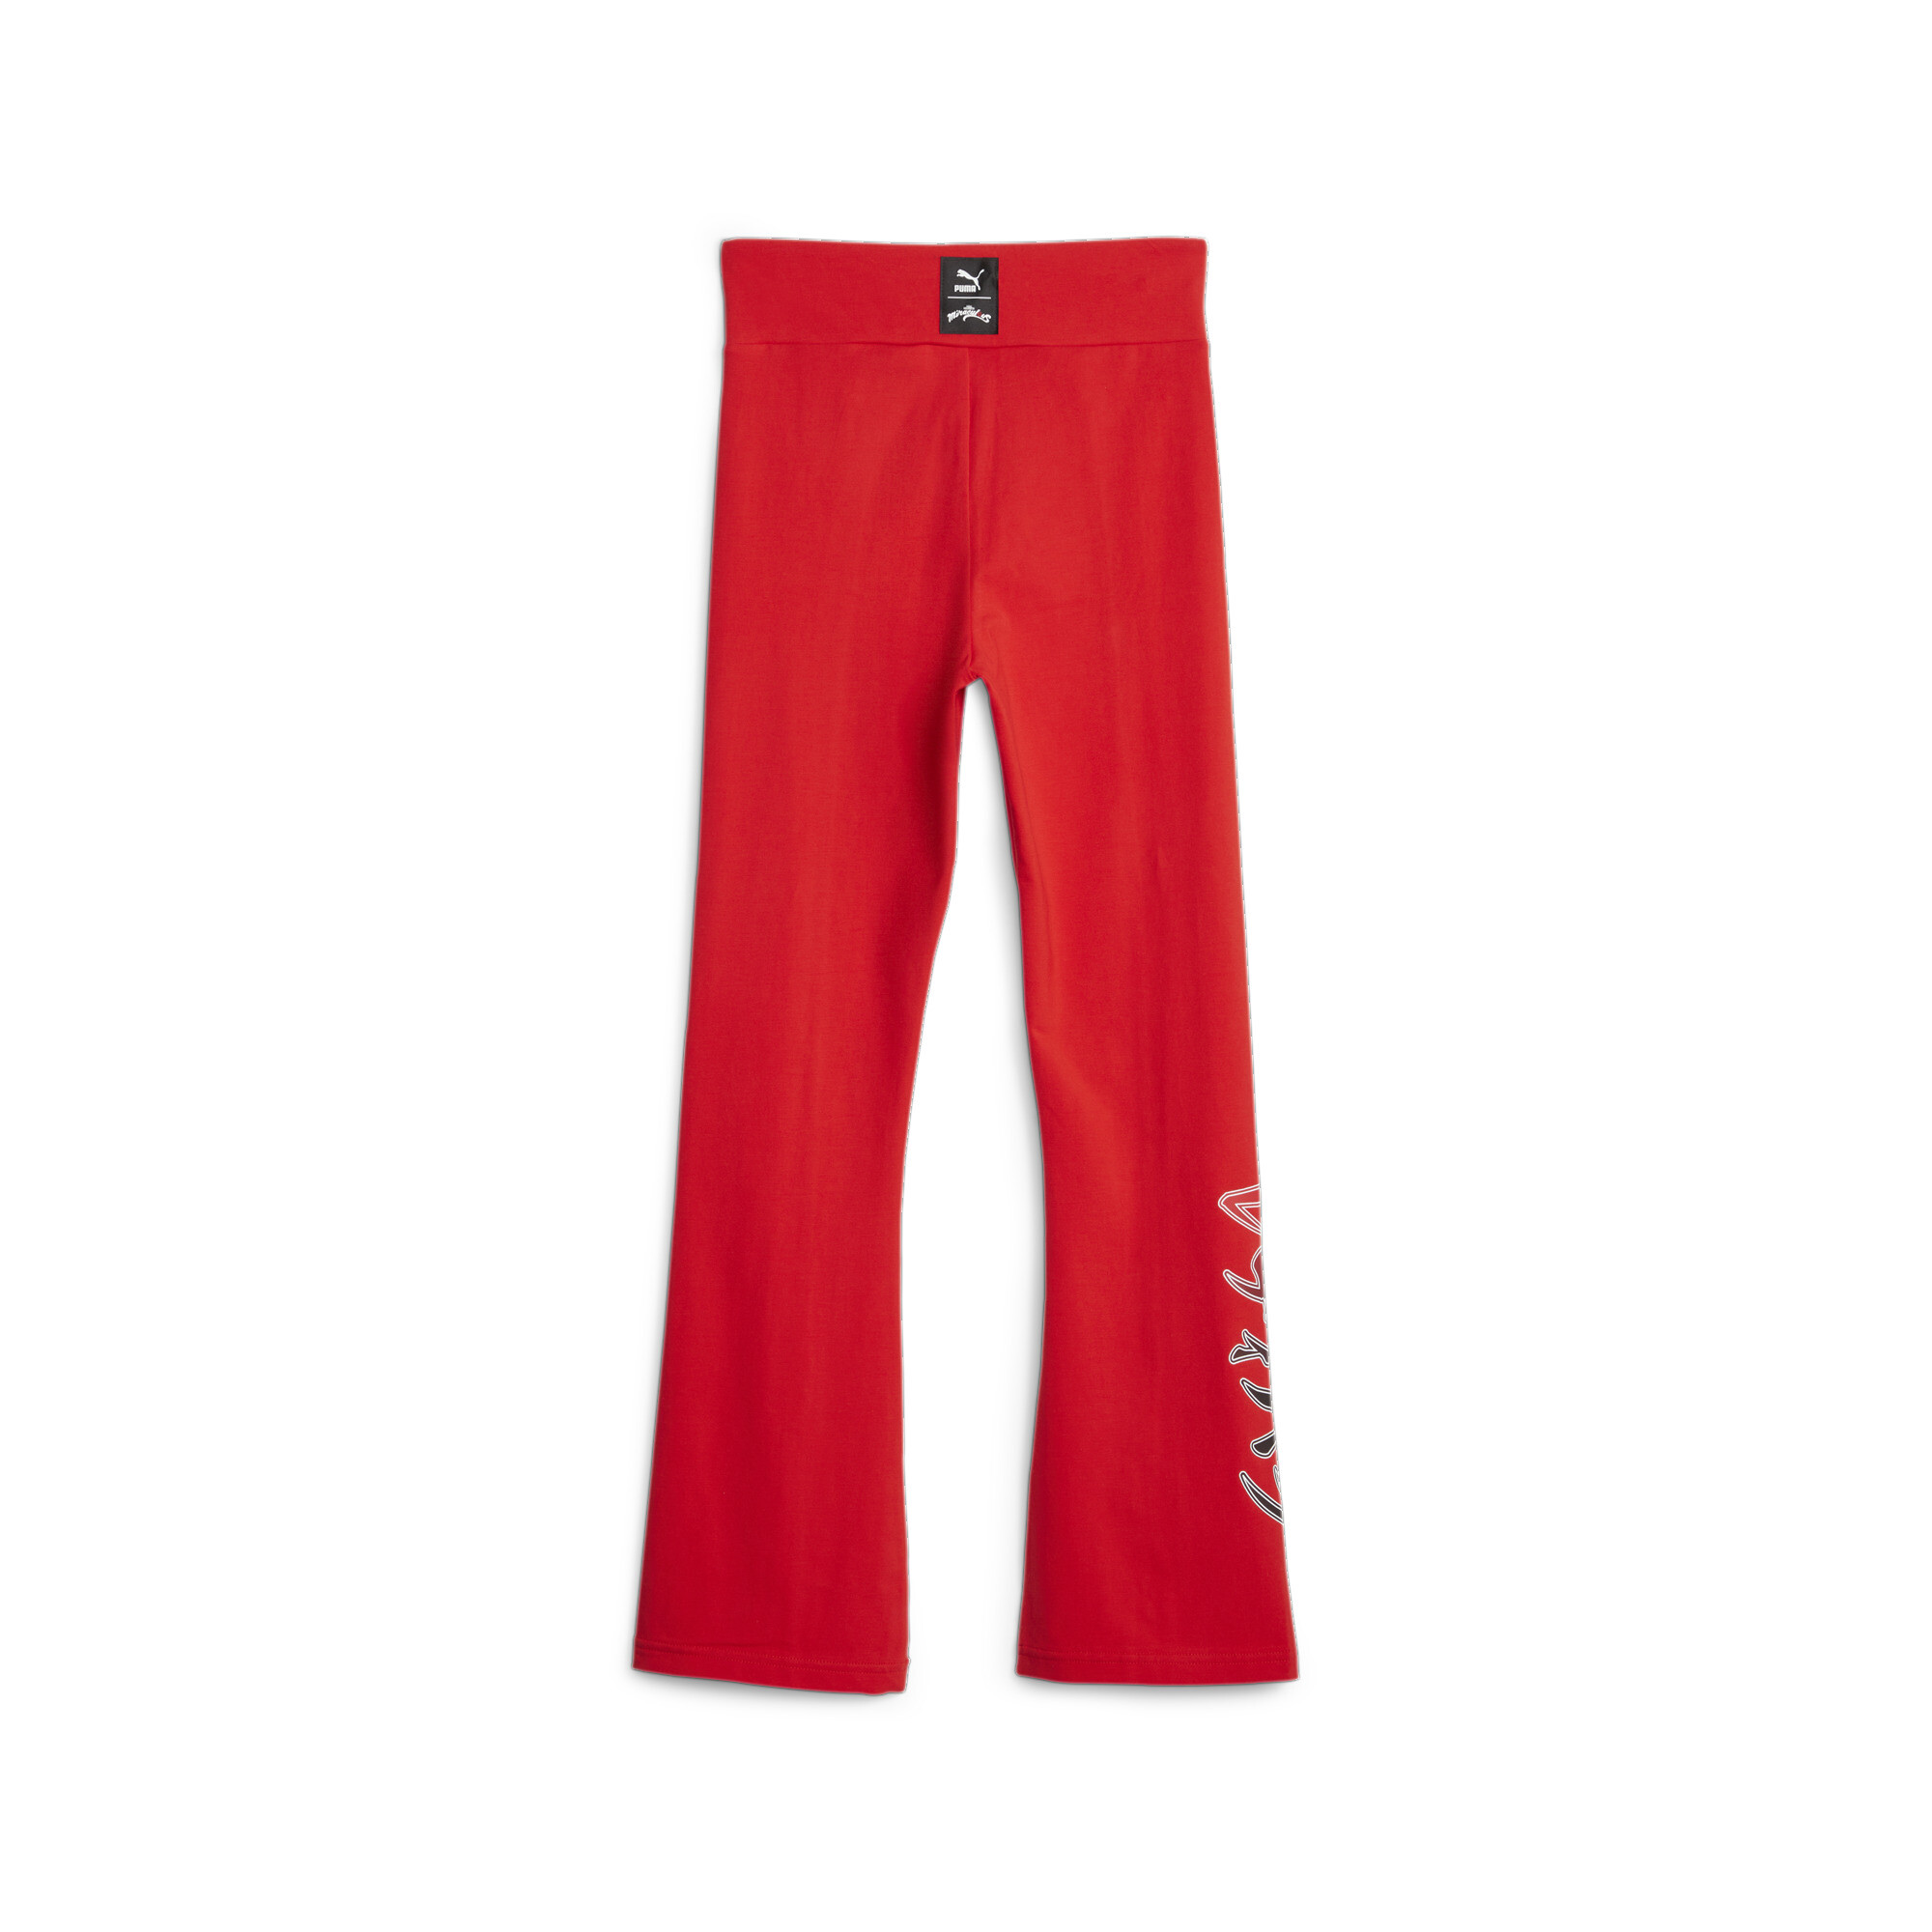 PUMA X MIRACULOUS Leggings In Red, Size 11-12 Youth